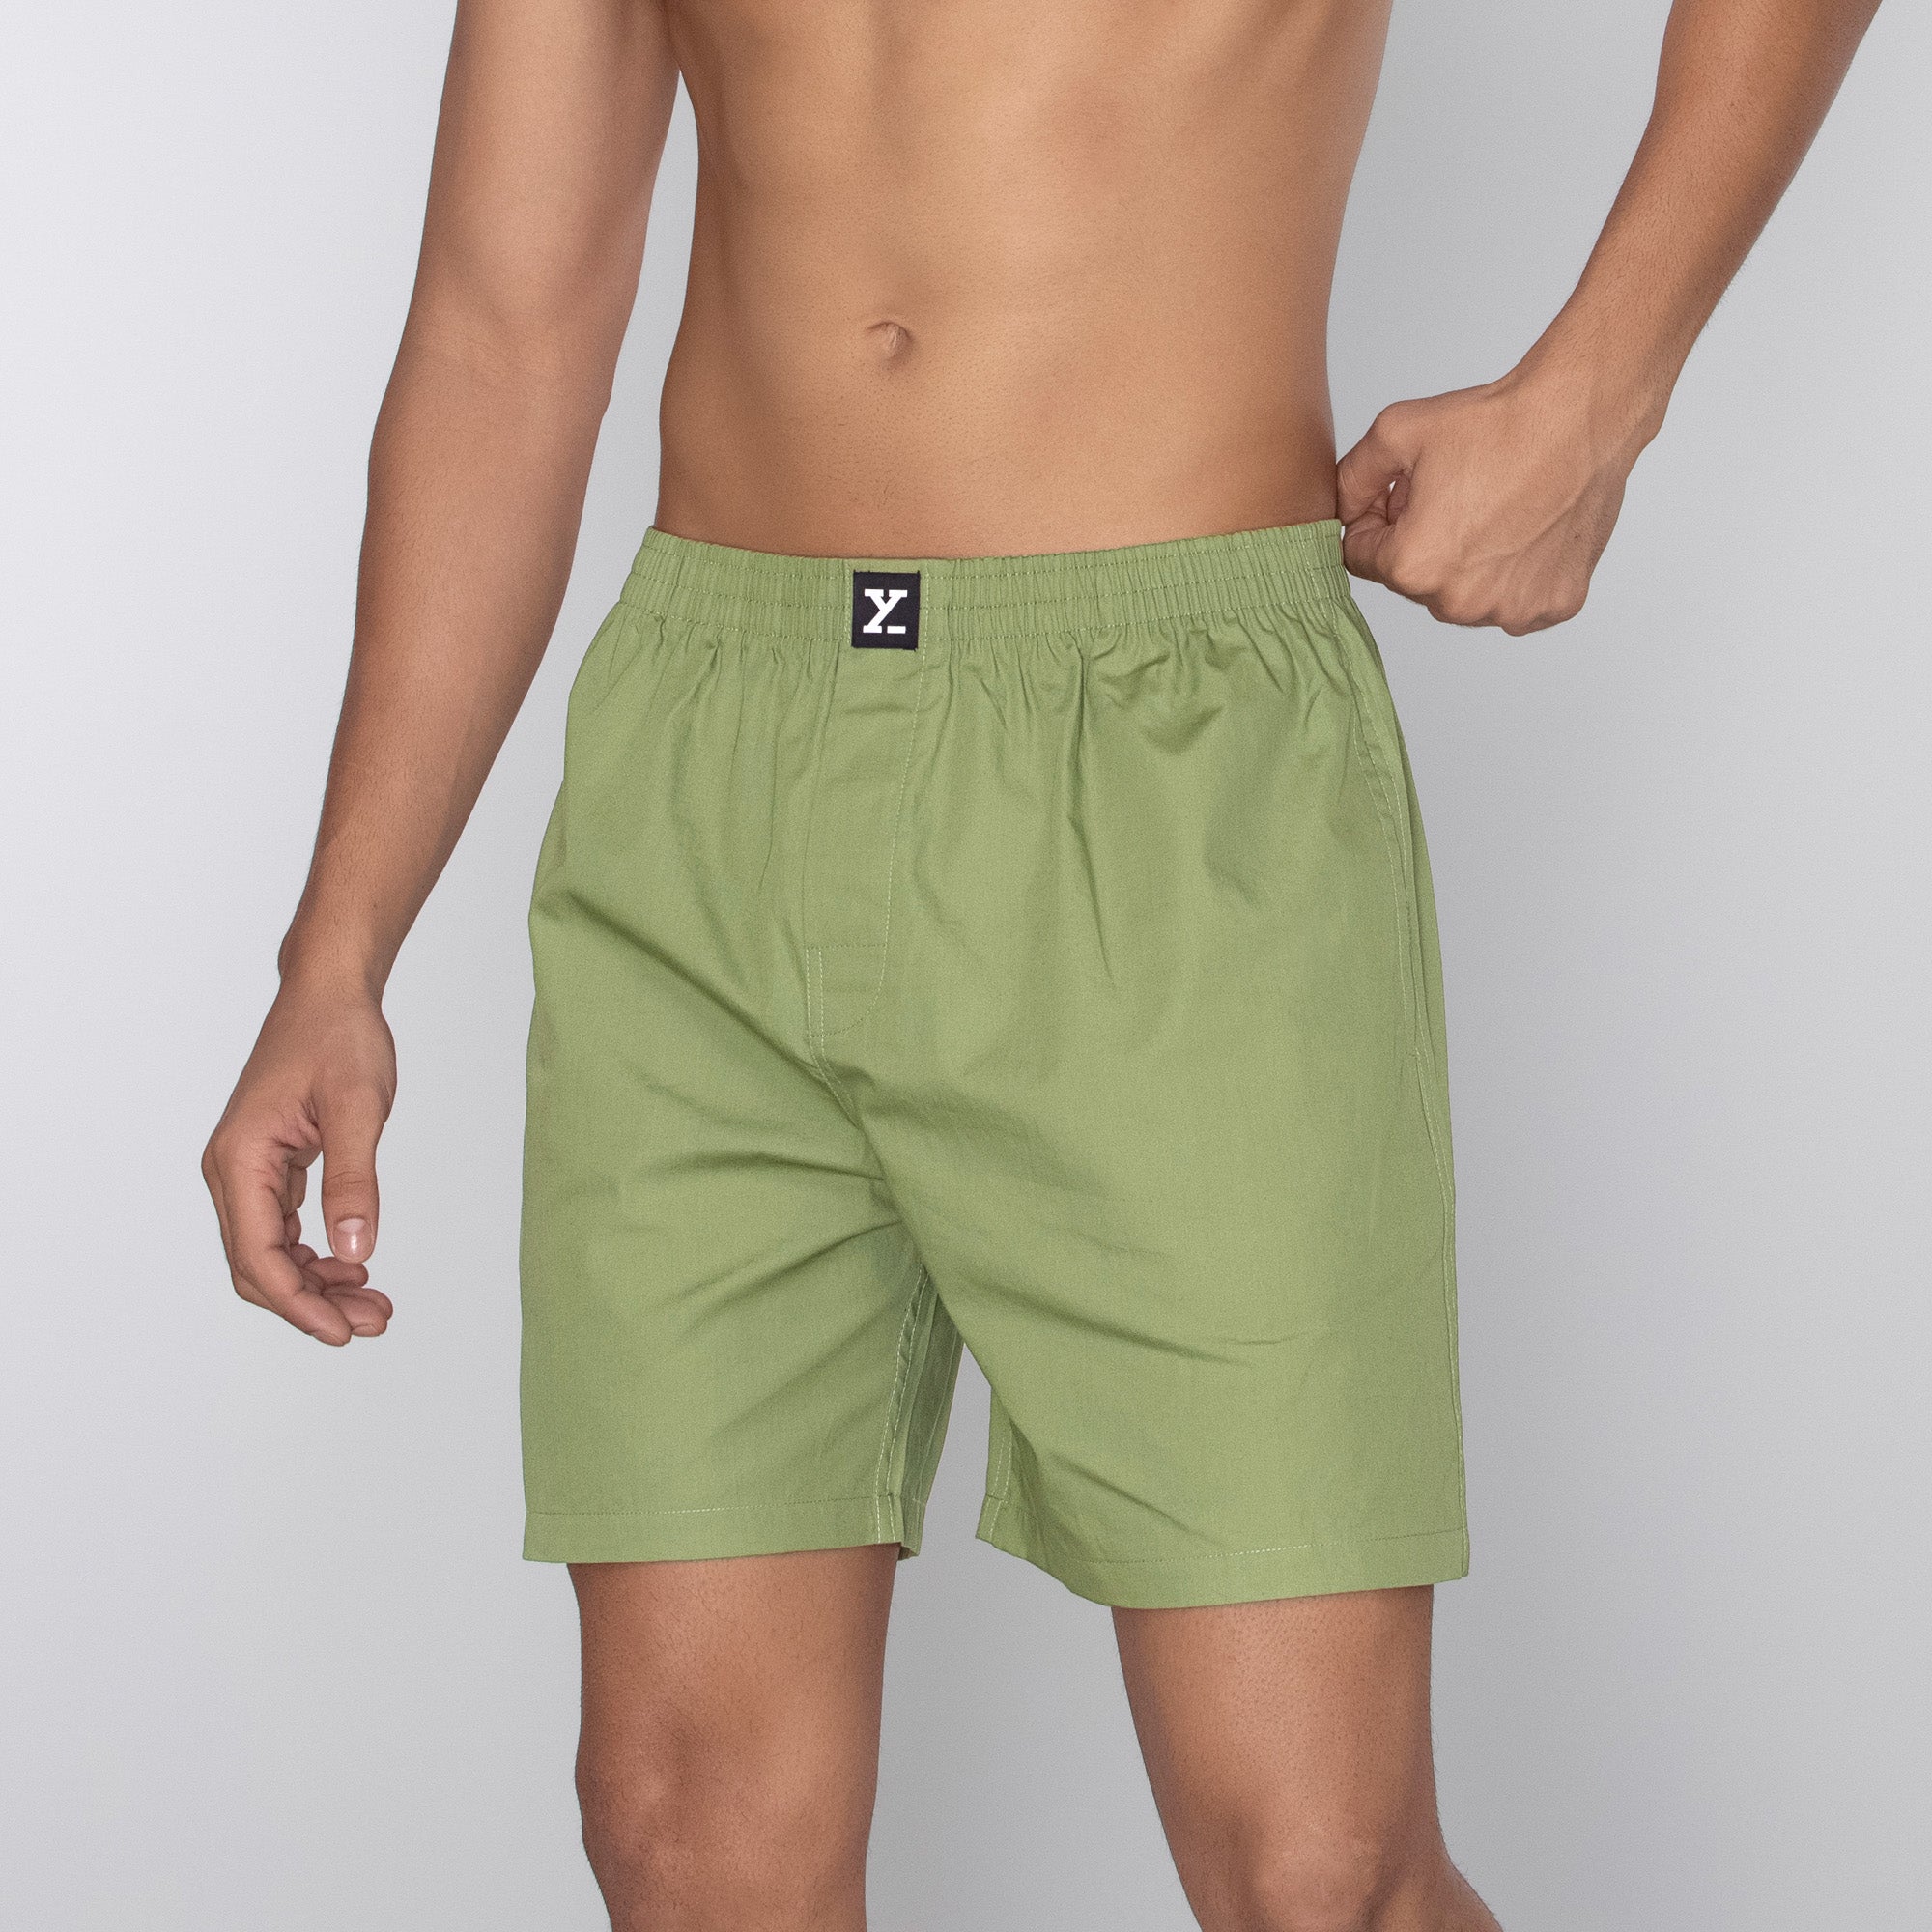 Pace Super Combed Cotton Boxer Shorts For Men Olive Green - XYXX Crew